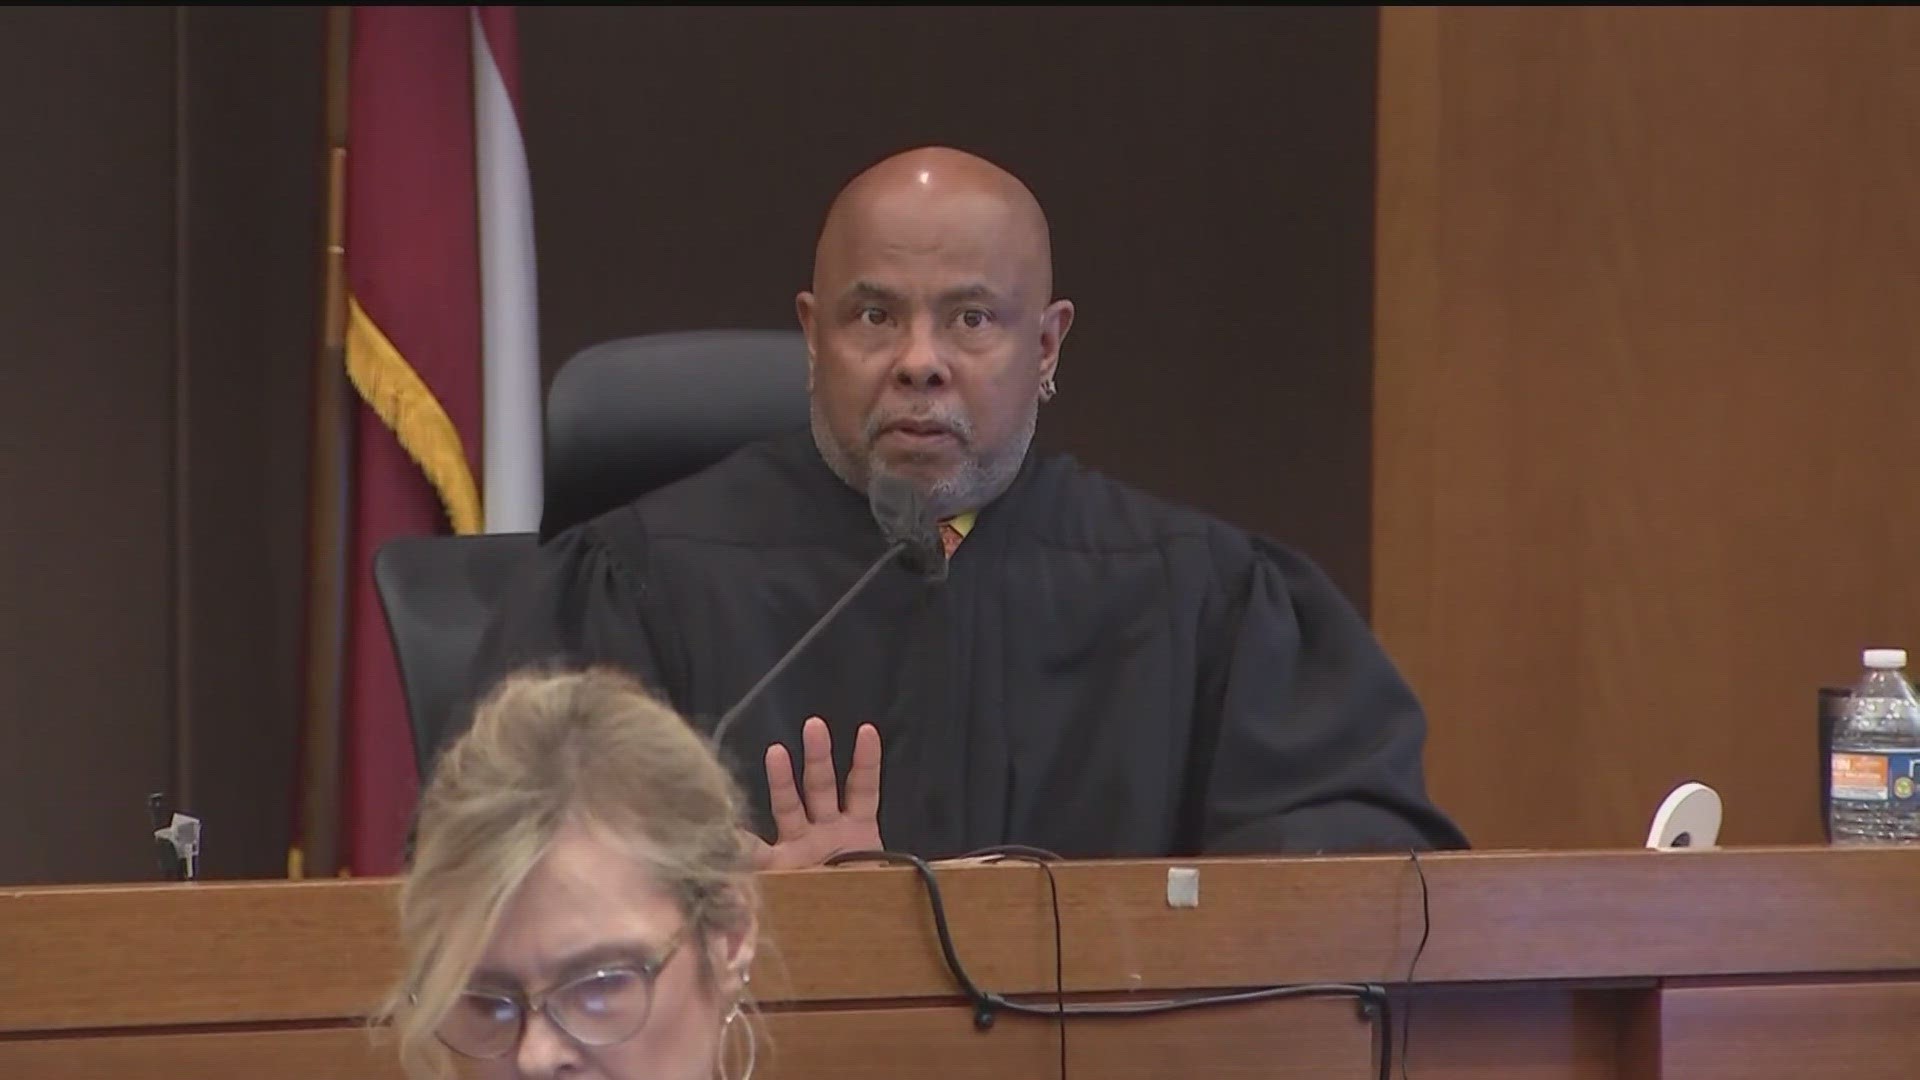 On Thursday, Judge Ural Glanville yelled at Chief Deputy District Attorney Adriane Love after she disagreed with his ruling.